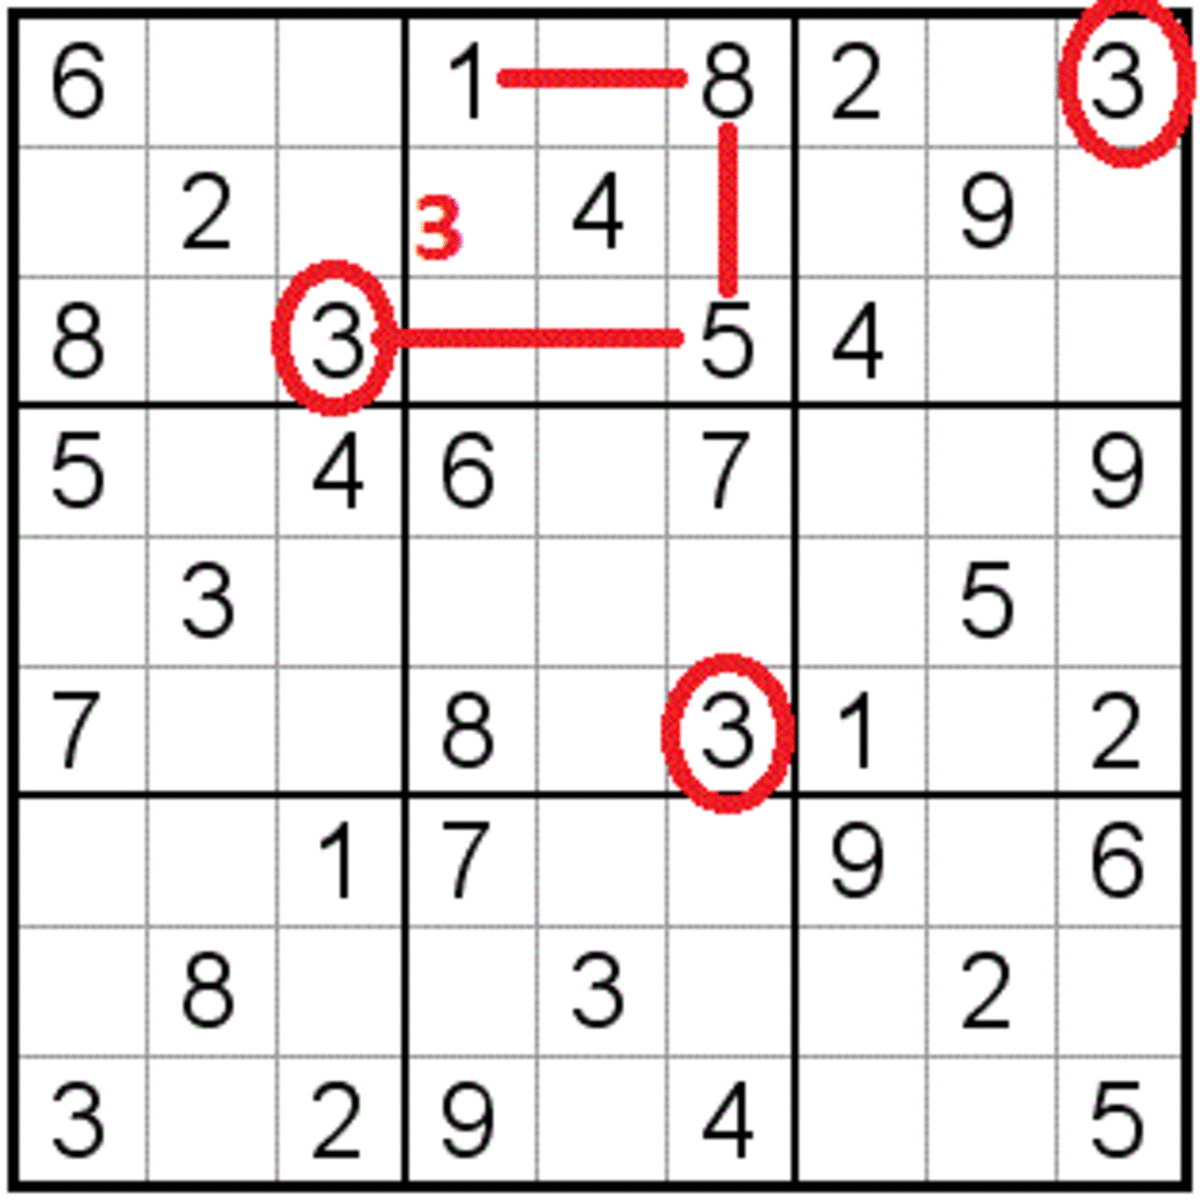 5-simple-tricks-to-solve-sudoku-hubpages